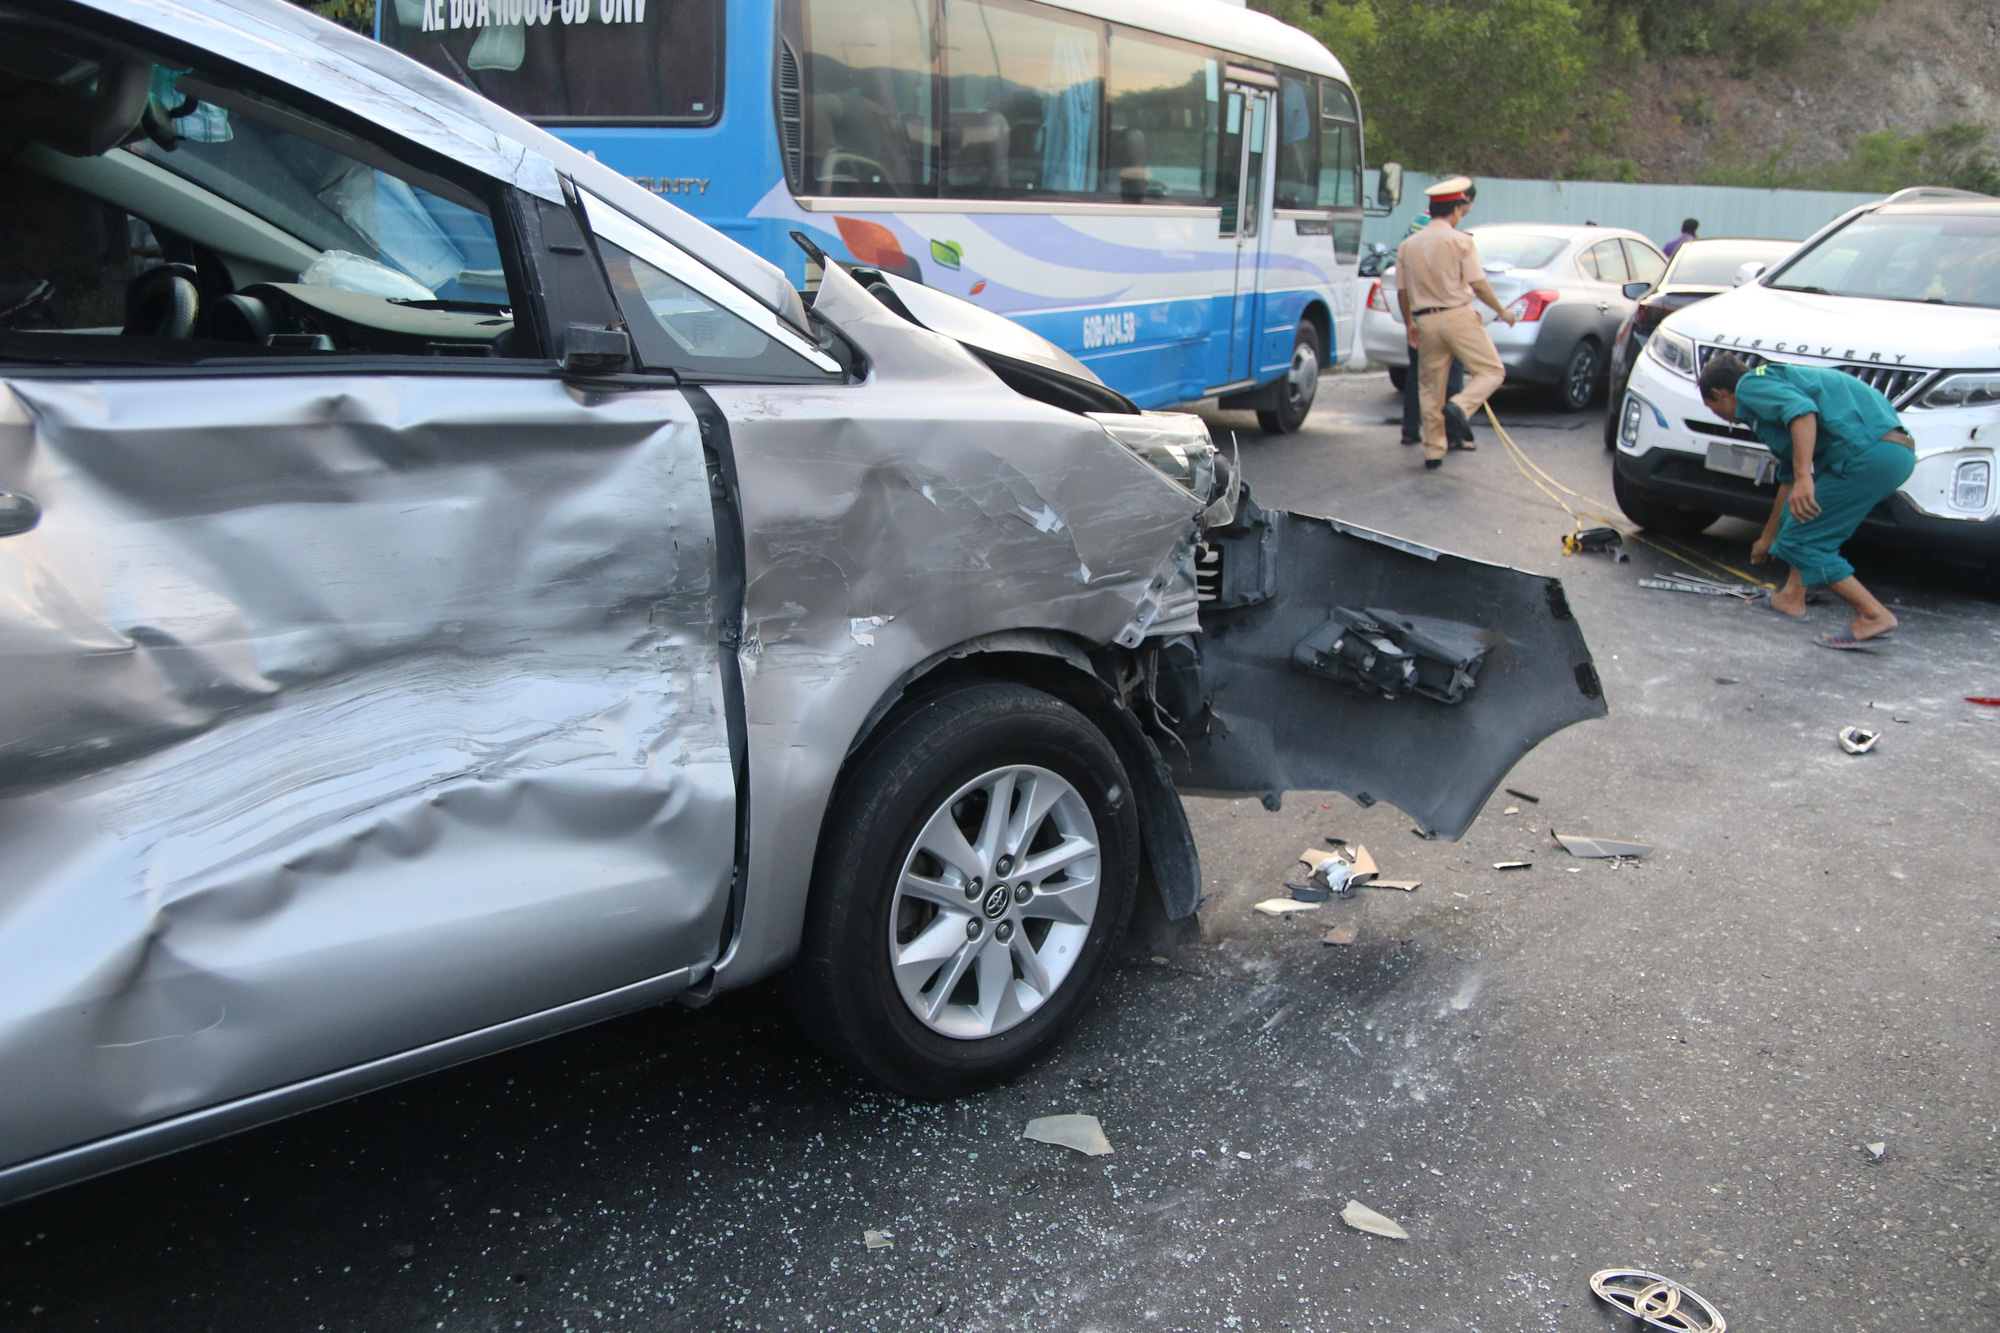 Multiple vehicles are damaged in a pile-up on the Cu Hin mountain pass in Nha Trang City, Khanh Hoa Province, Vietnam, August 30, 2020. Photo: Phan Song Ngan / Tuoi Tre